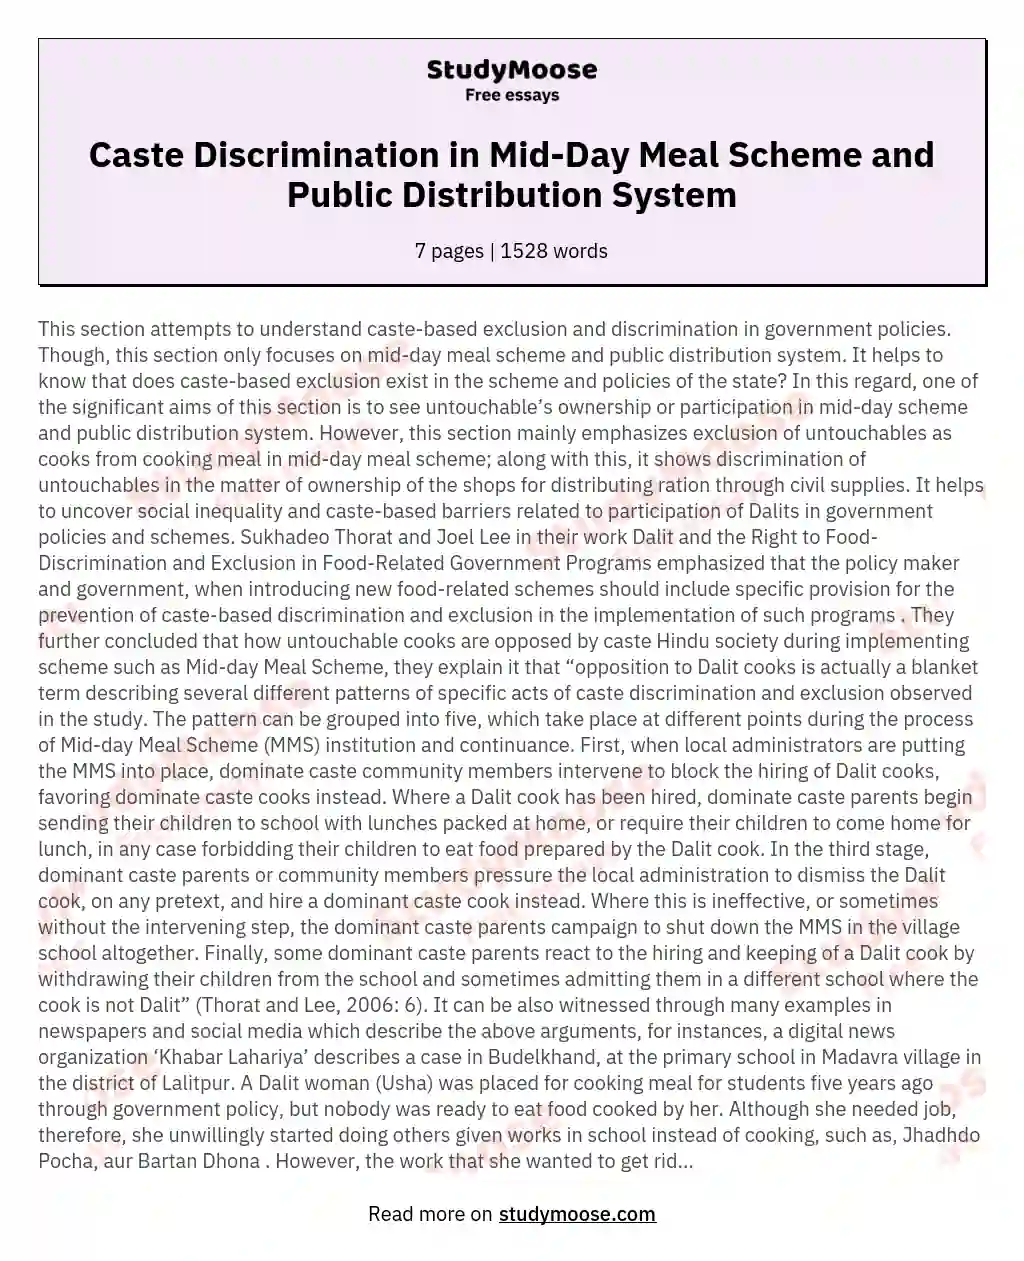 Caste Discrimination in Mid-Day Meal Scheme and Public Distribution System essay